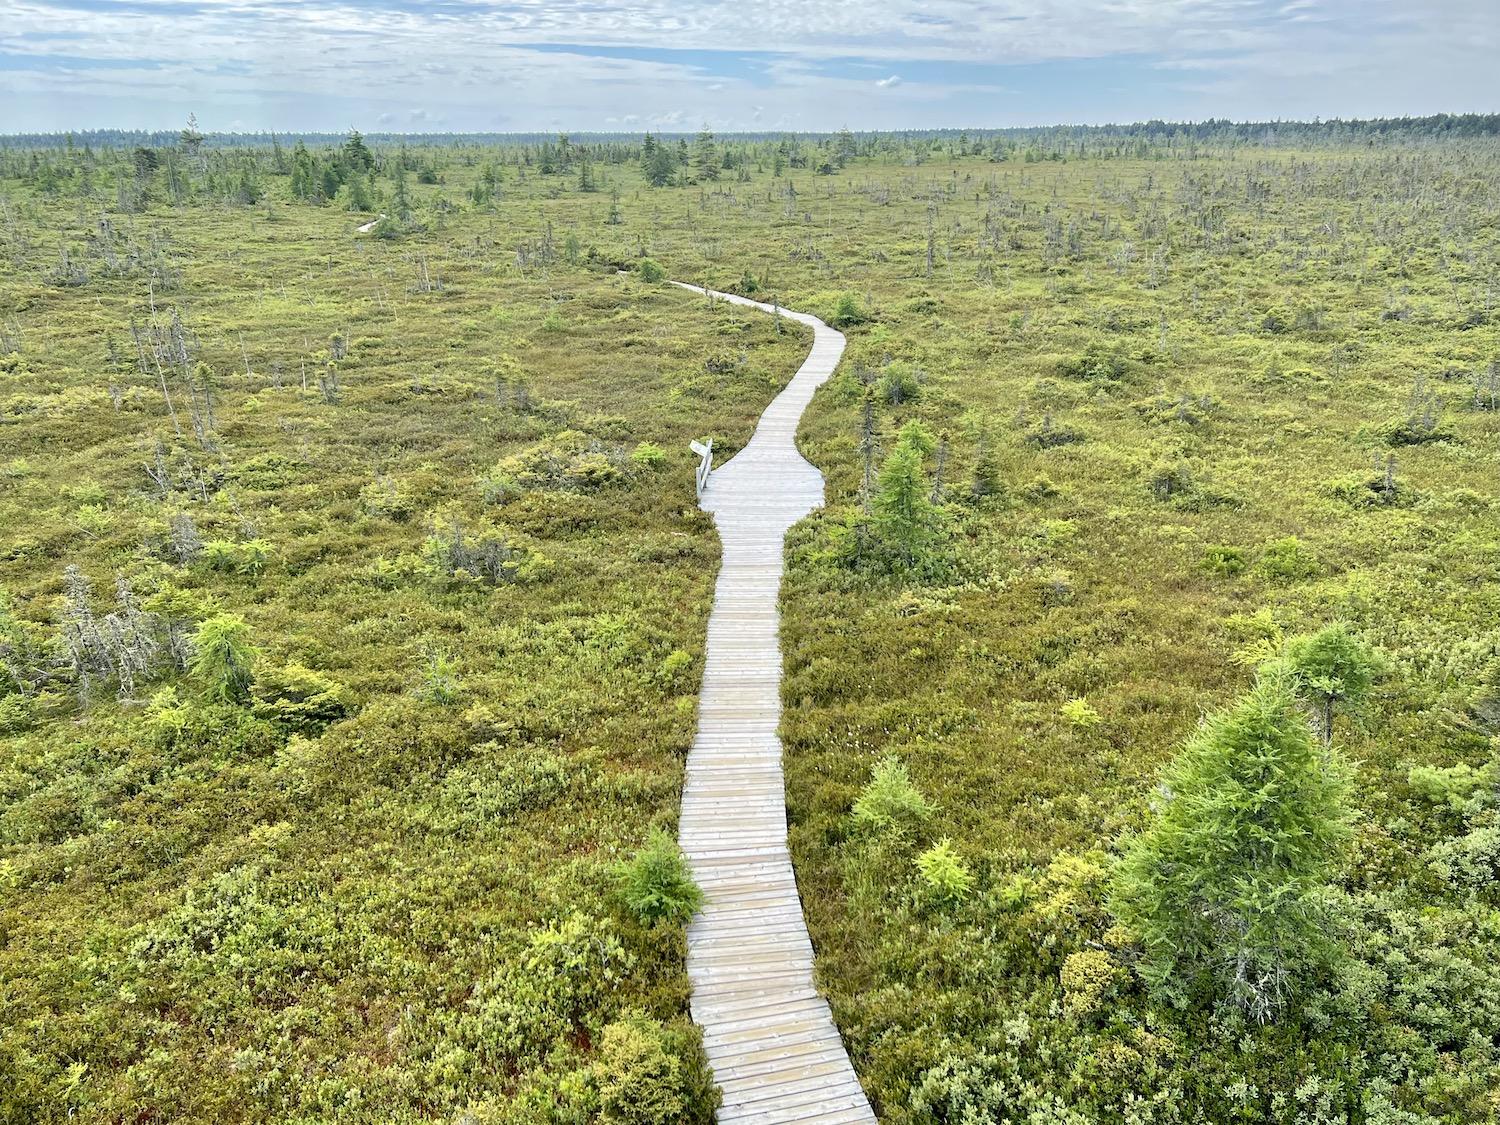 While Kouchibouguac is a coastal park, it also has bogs and this is the view from an observation tower on the Bog Trail.